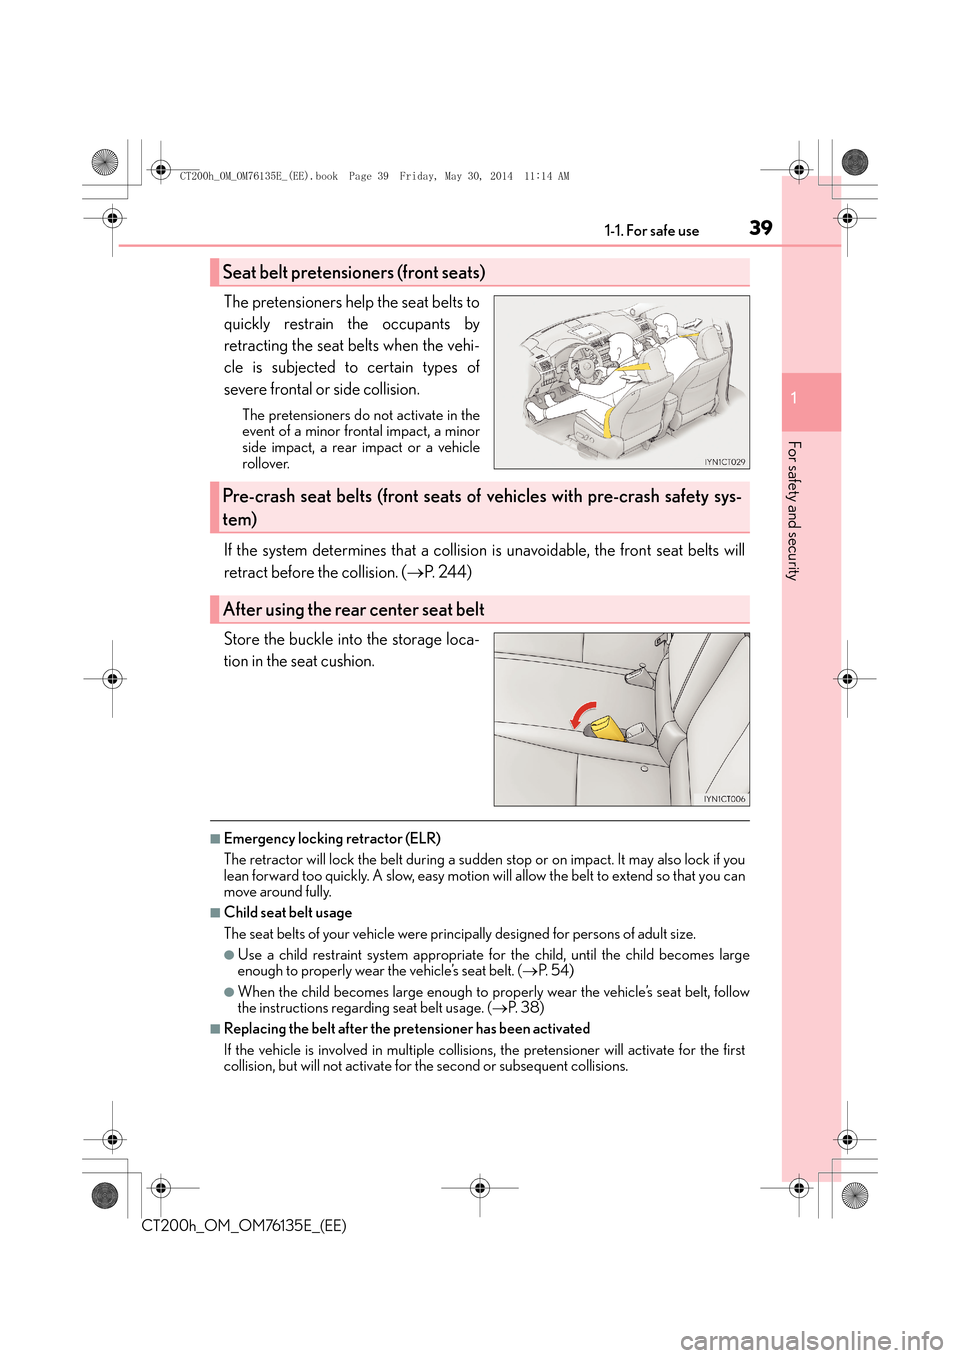 Lexus CT200h 2014  Owners Manual (in English) 391-1. For safe use
1
CT200h_OM_OM76135E_(EE)
For safety and security
The pretensioners help the seat belts to
quickly restrain the occupants by
retracting the seat belts when the vehi-
cle is subject